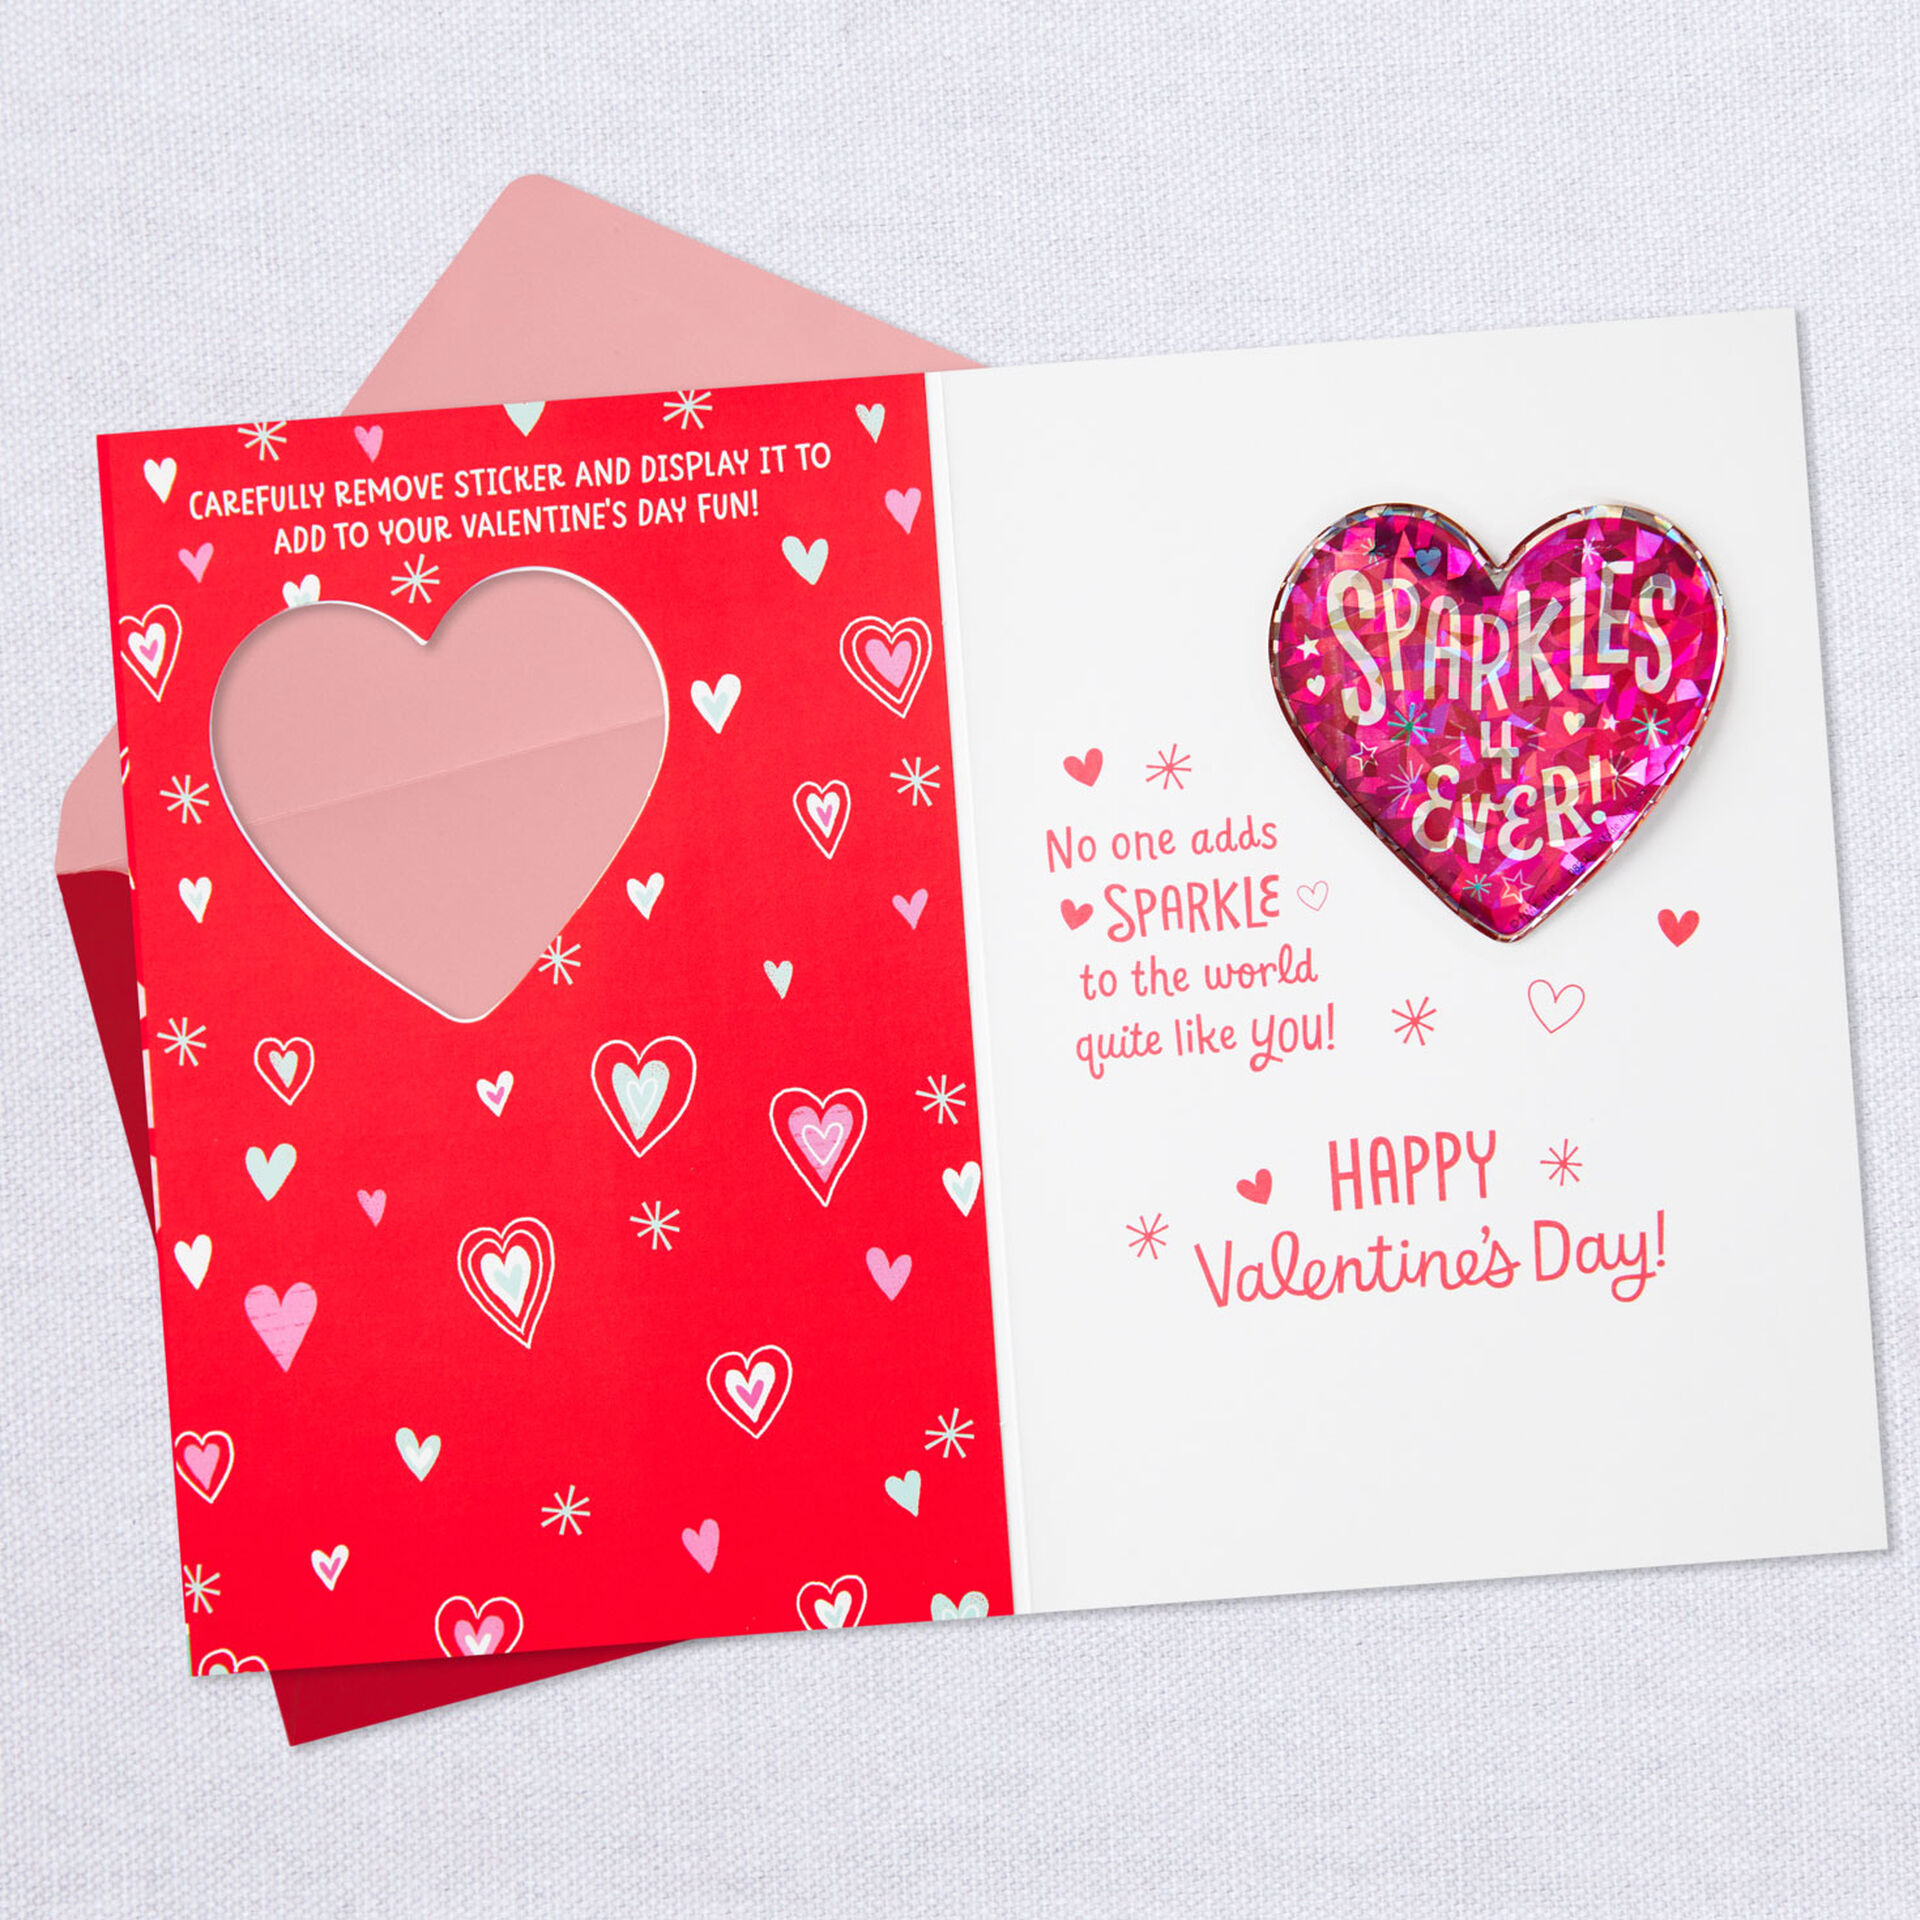 Granddaughter-Valentines-Day-Card-With-Sticker_499VEI1135_03